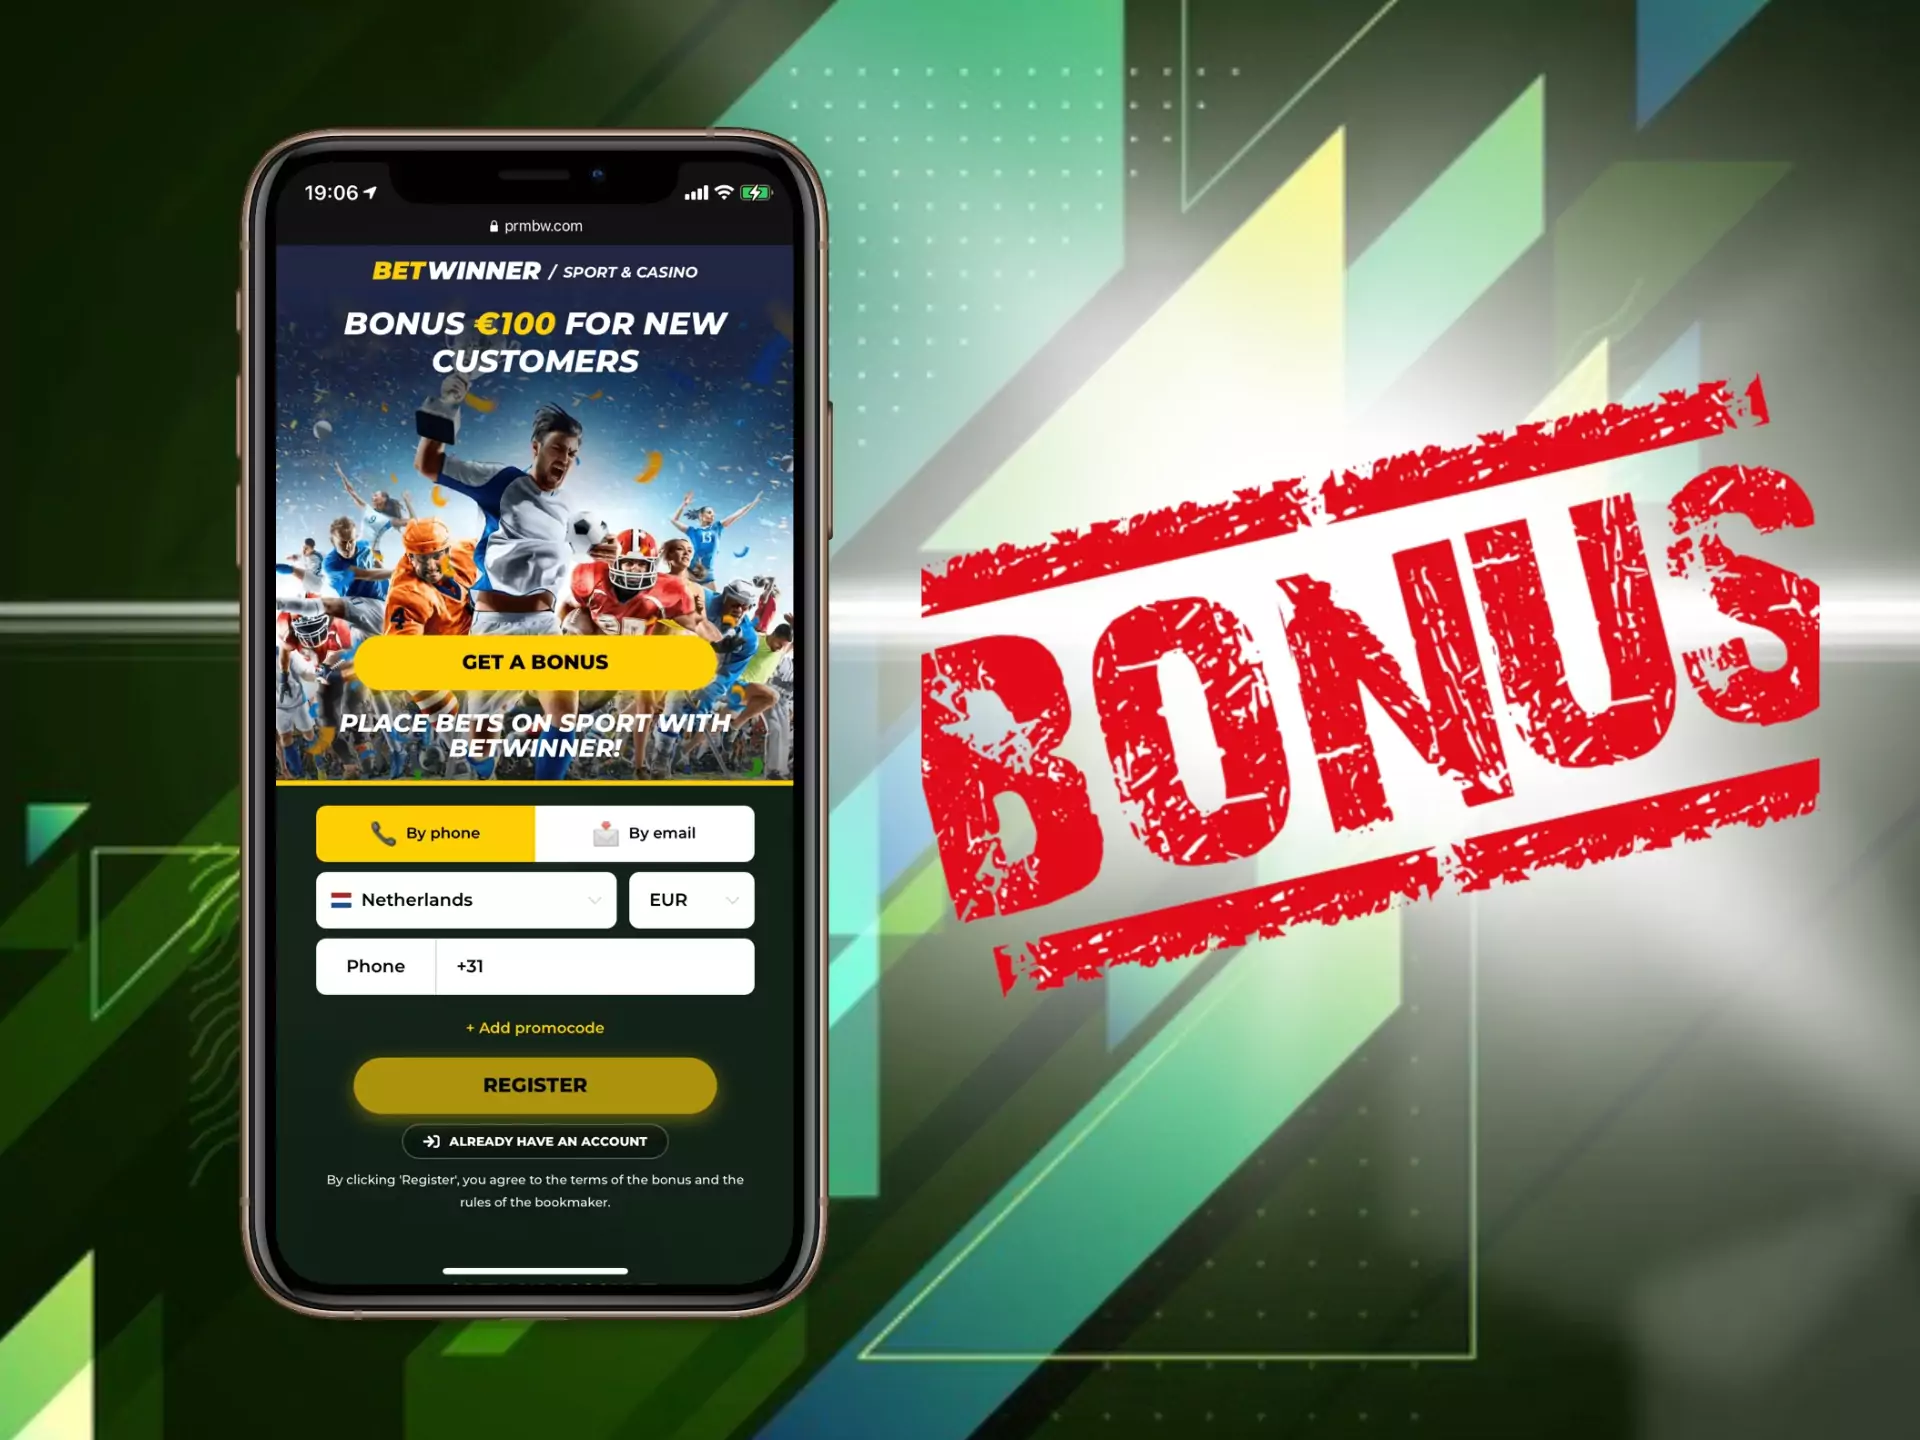 Make a deposit via your mobile phone and get your welcome bonus at Betwinner app.